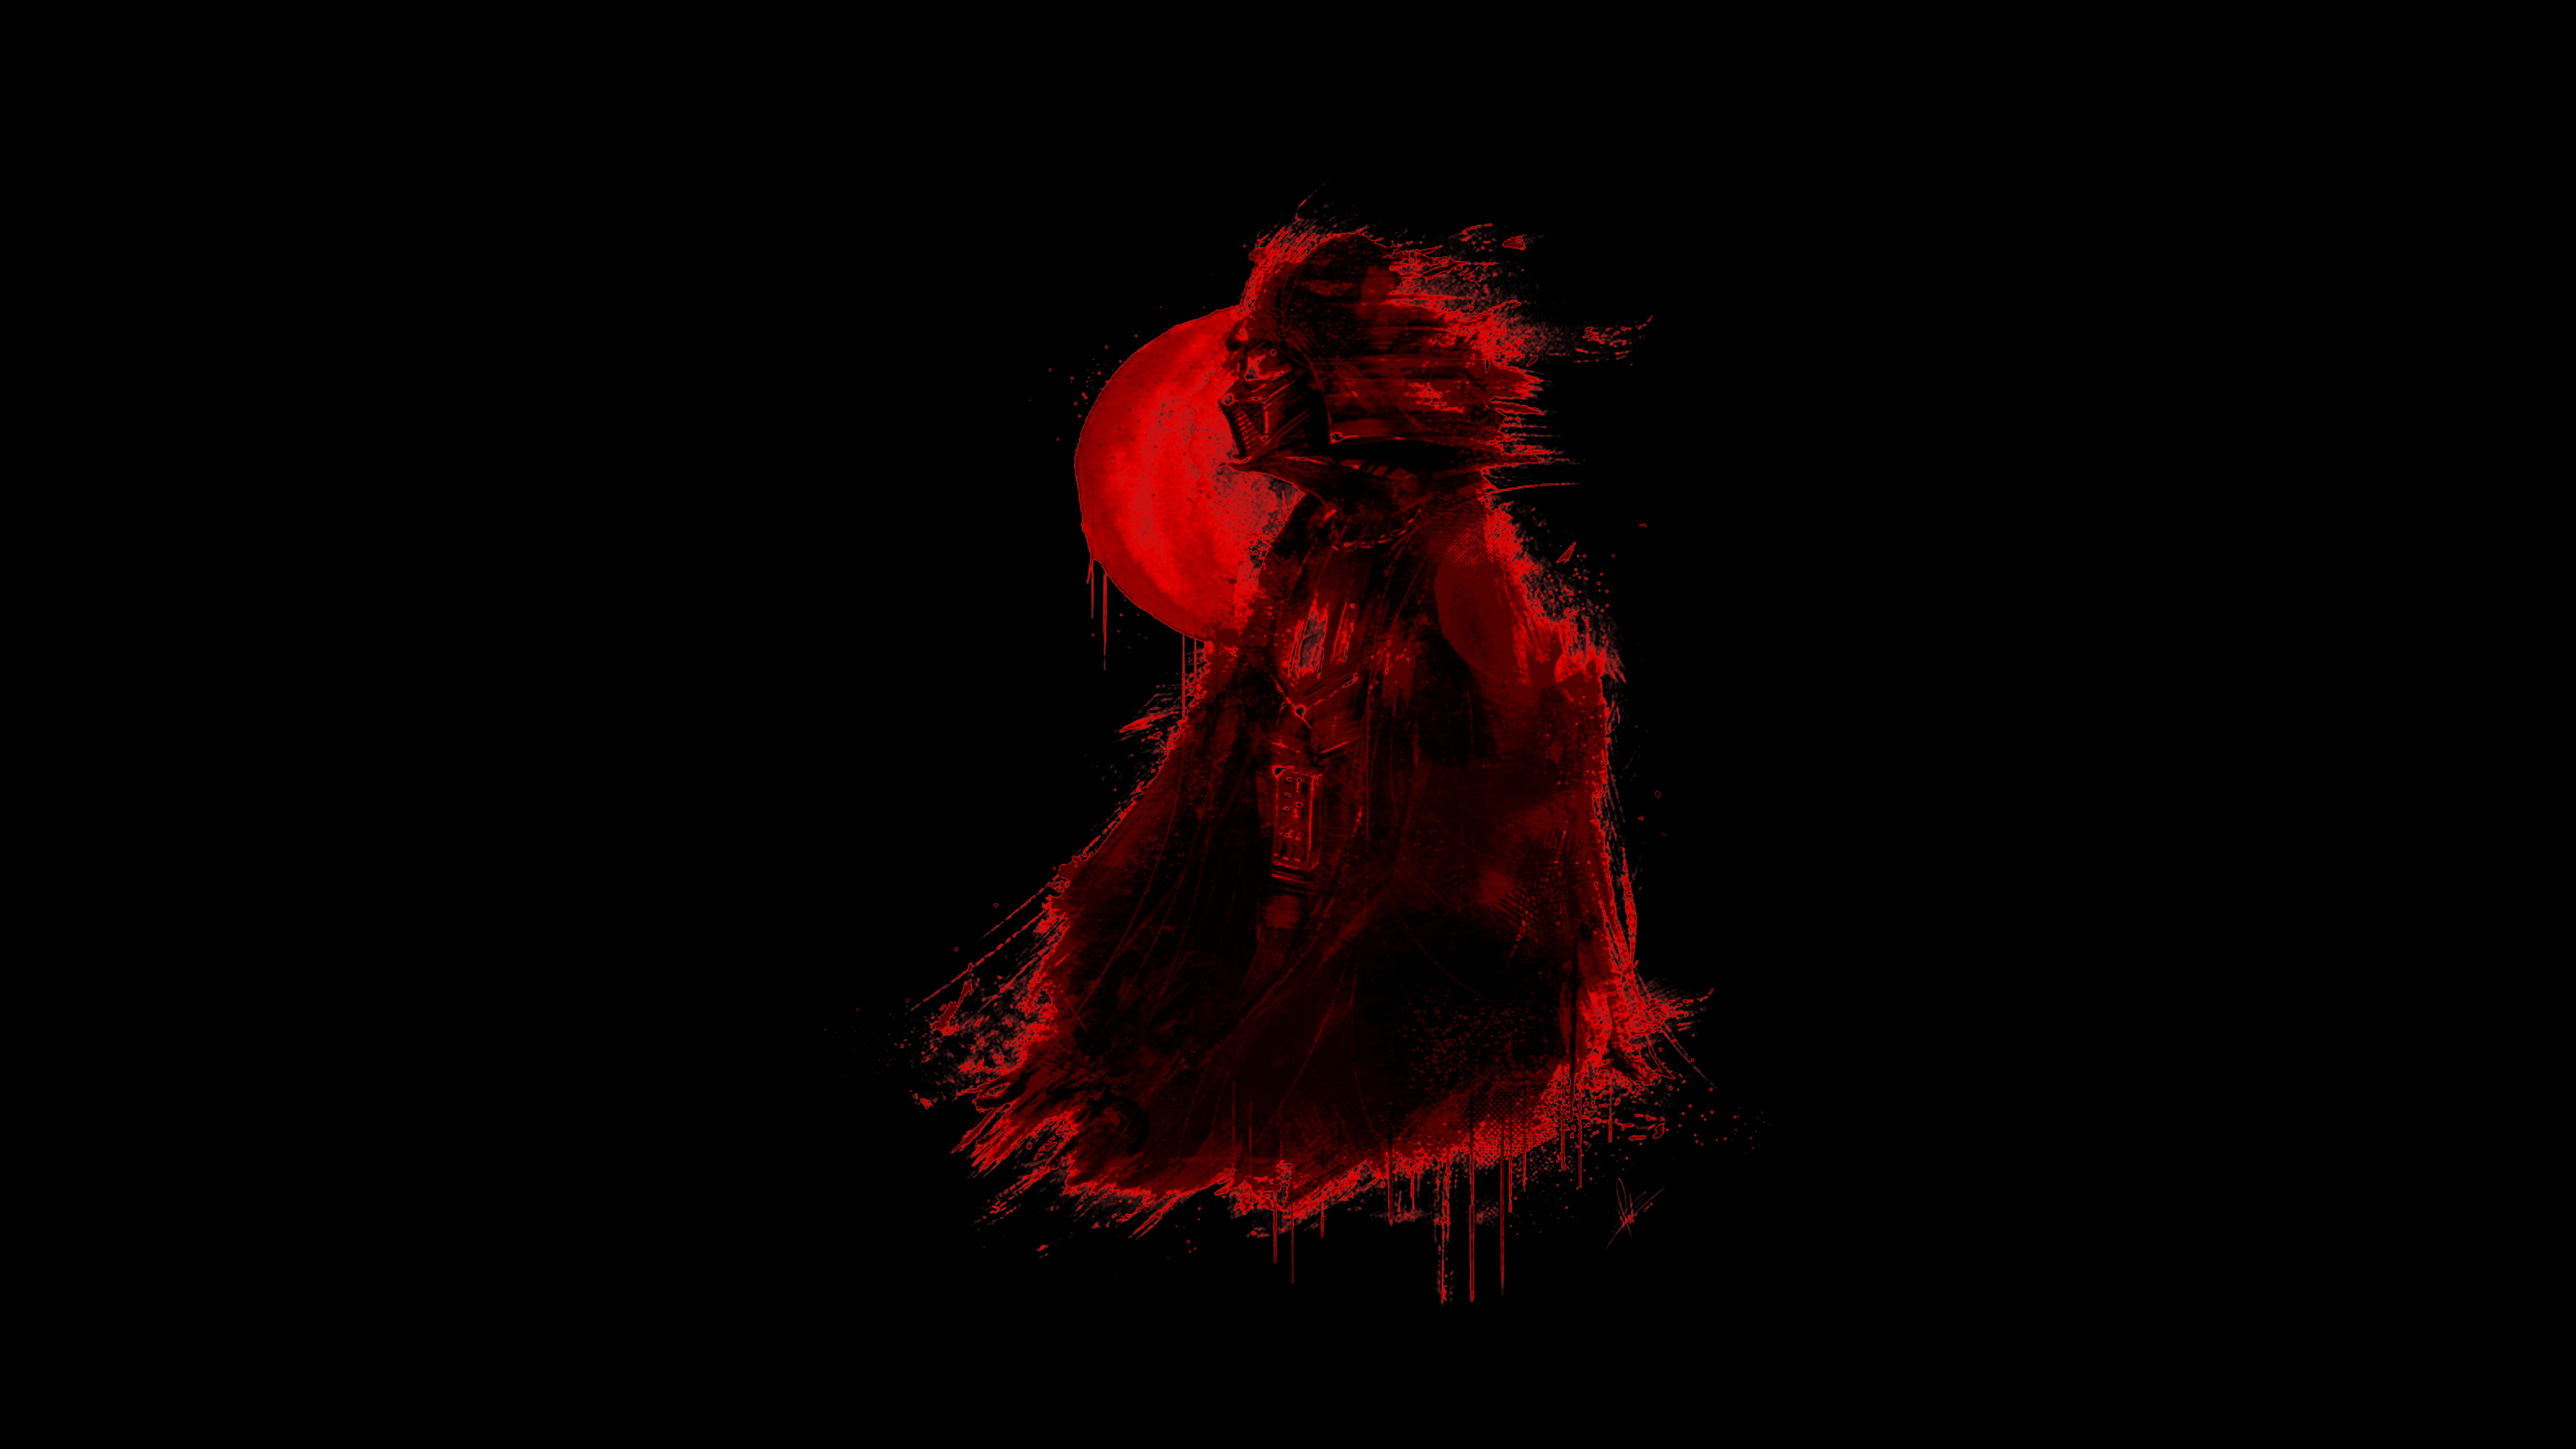 Stylized Red Vader for Black Amoled Screens [3840x2160]